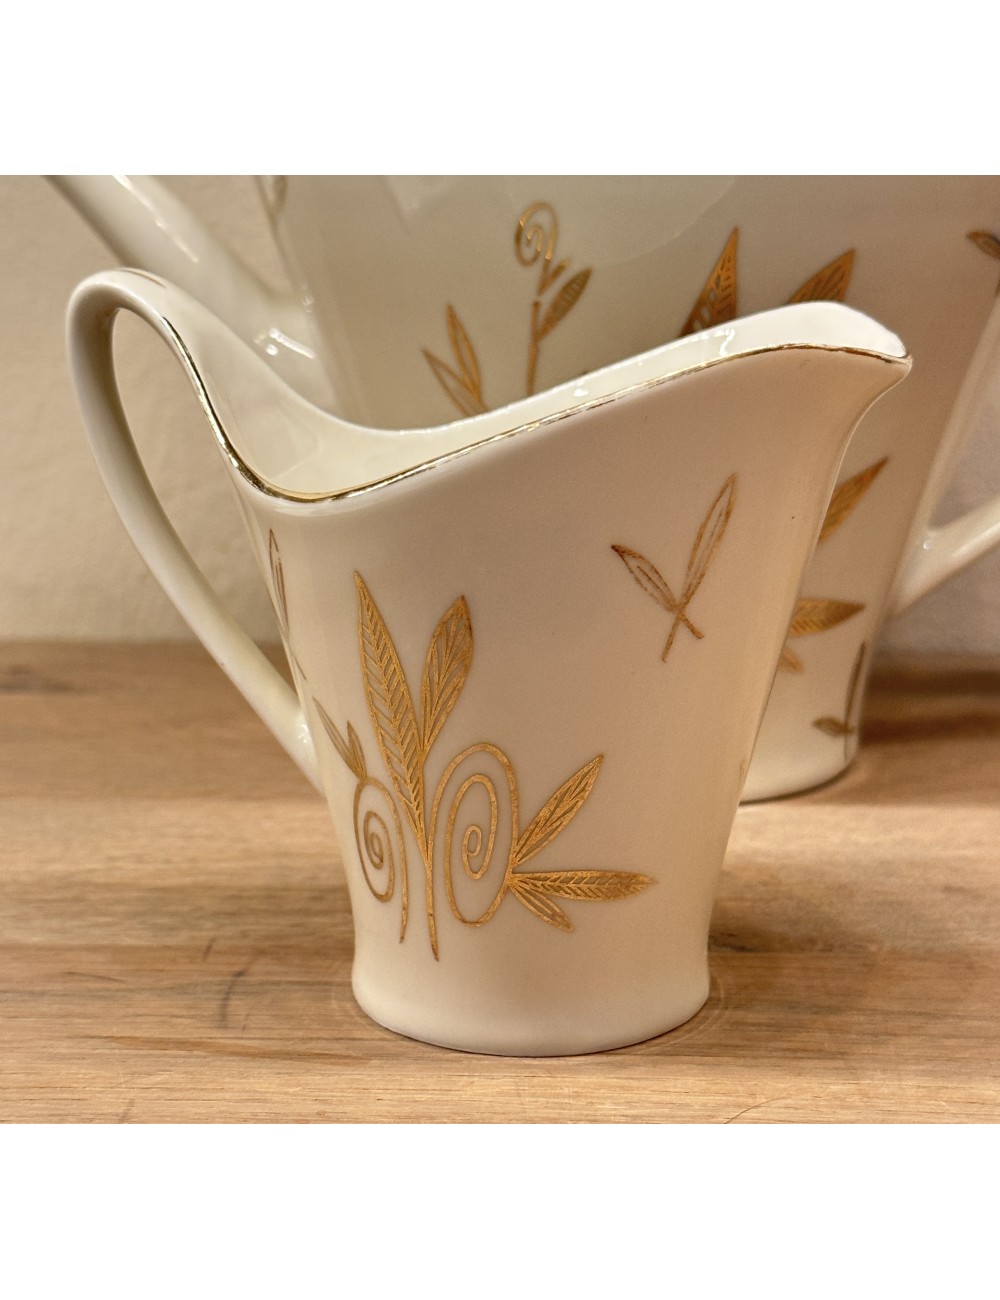 Milk jug - porcelain - Seltman Johann Bavaria - décor in cream with gold accents and leaves in gold color